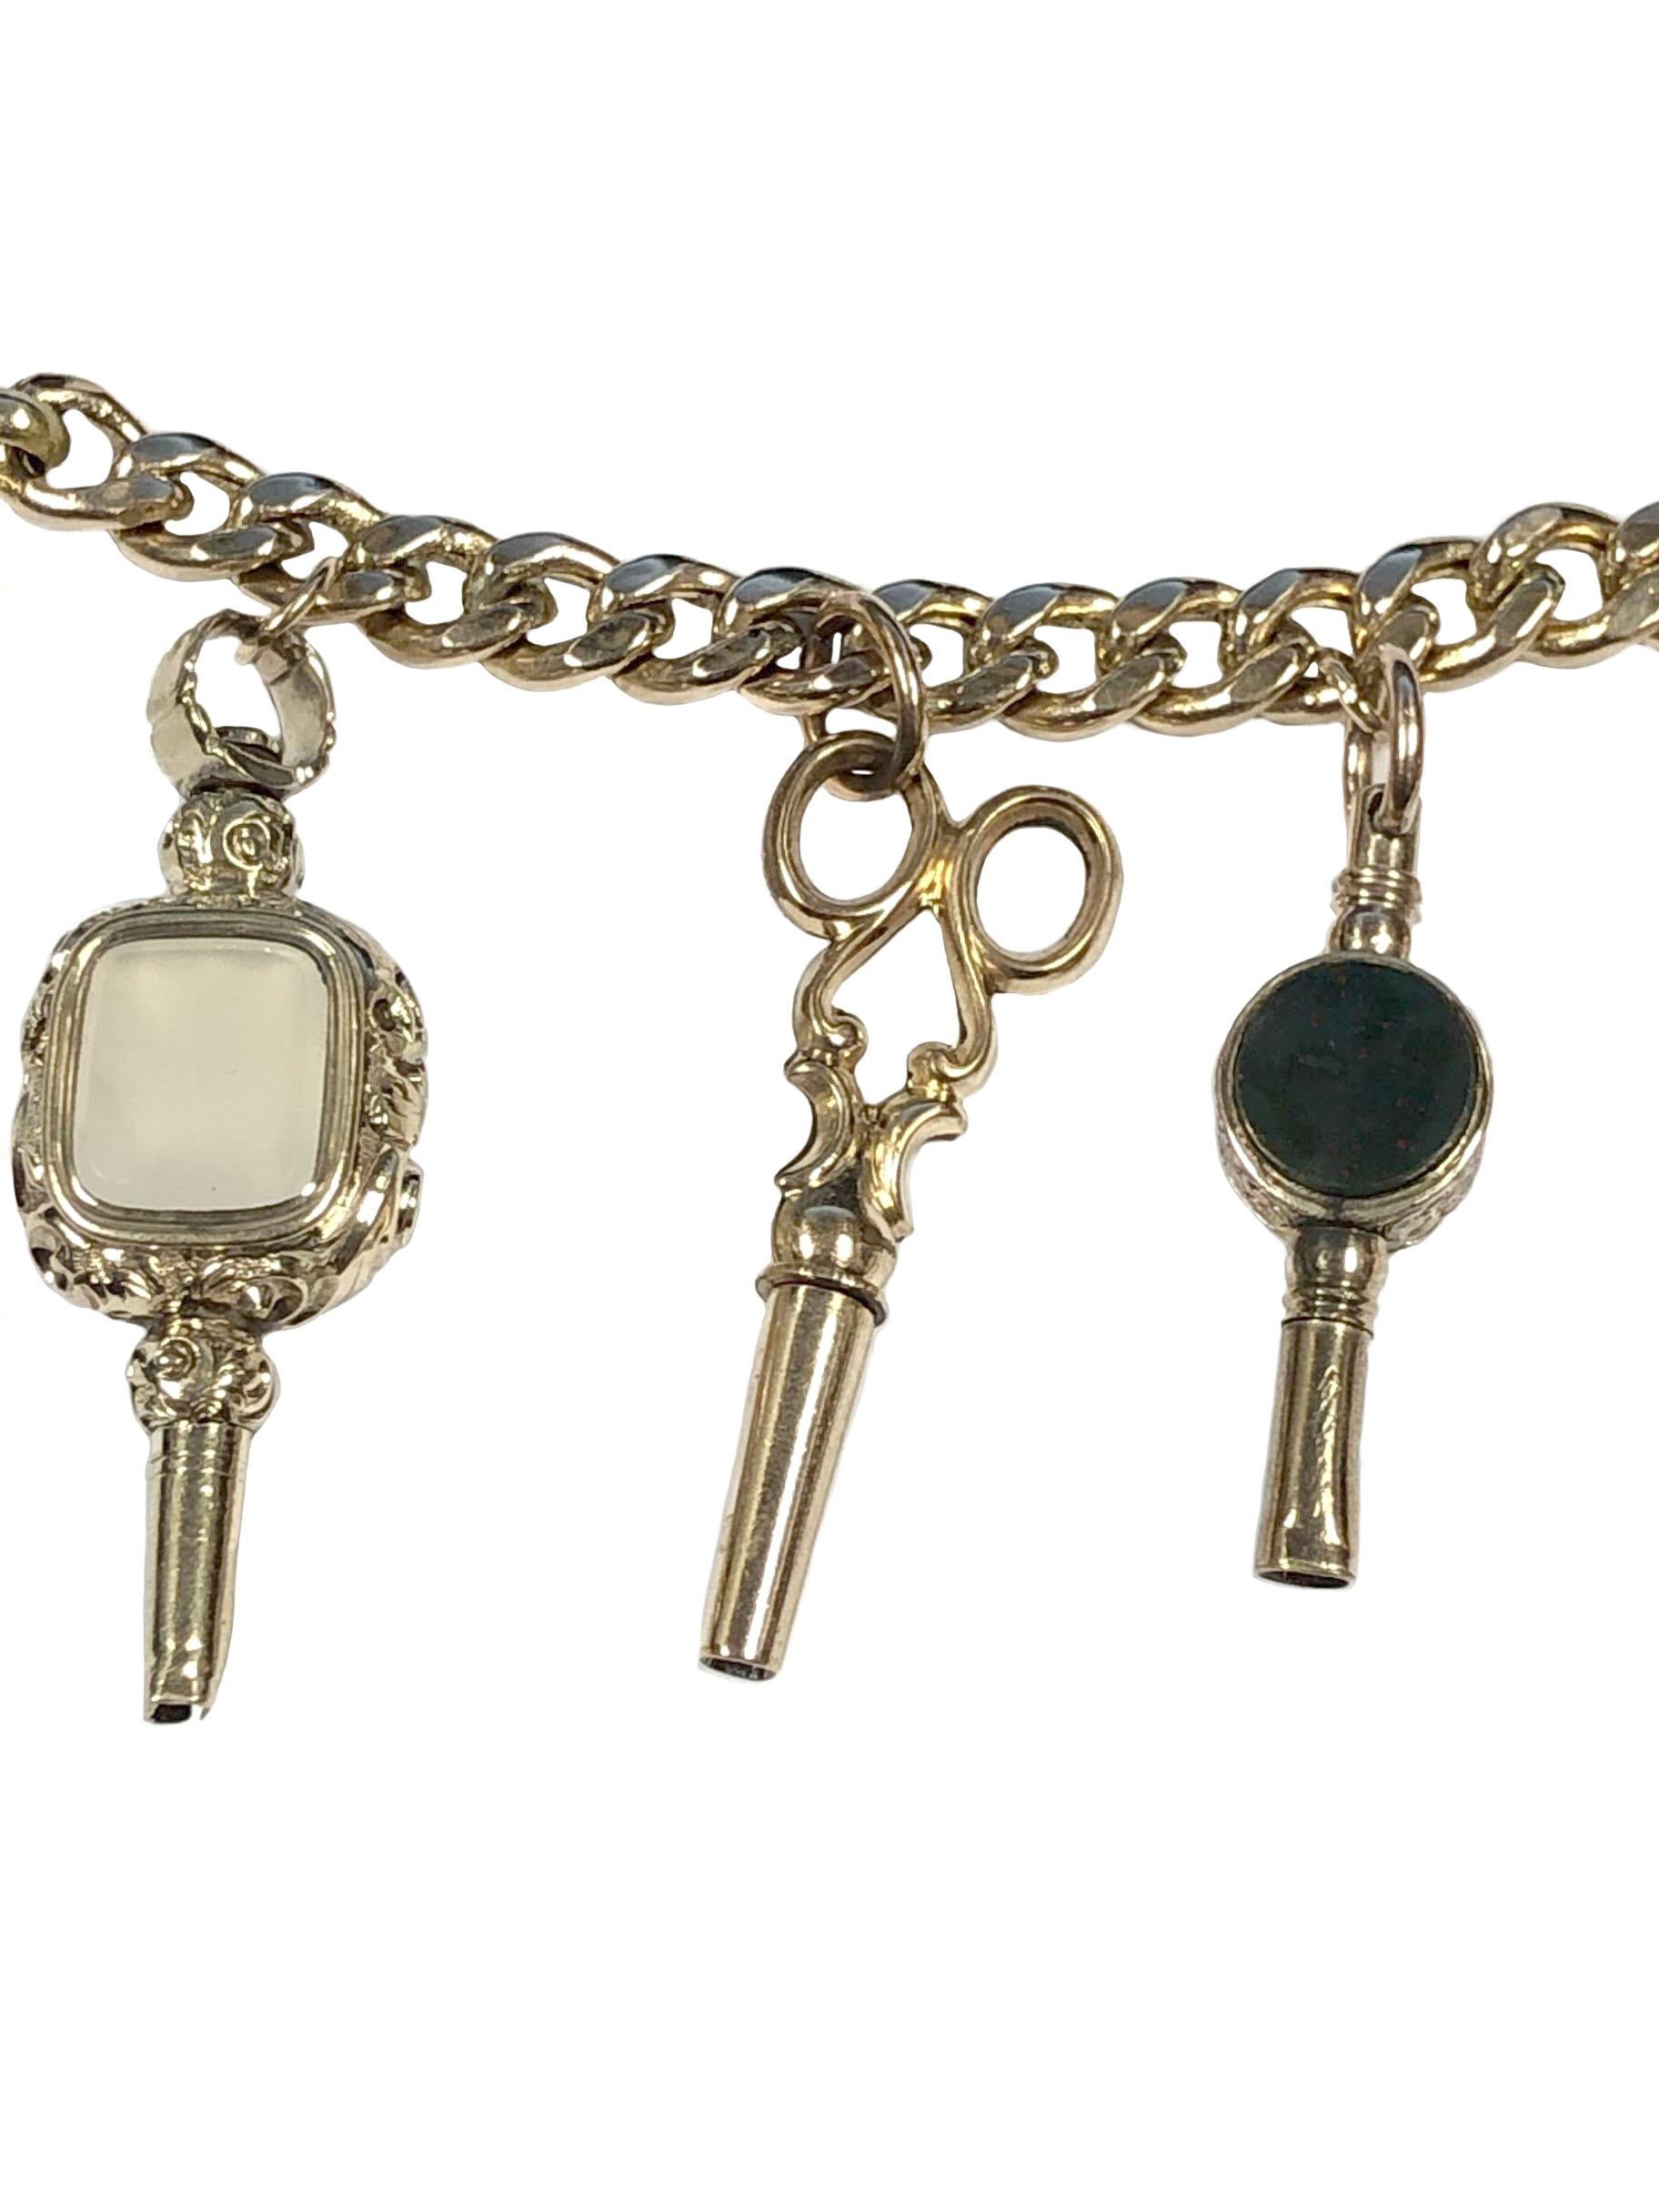 Circa 1800 to 1860s Mostly all Gold Watch Keys, attached from a 14k Yellow Gold Link Bracelet with an unusual Clutching Hand lock. some Keys set with Agate and other stones. Most of the Keys measure an average of 1 to 1 1/4 inch. Bracelet length 7